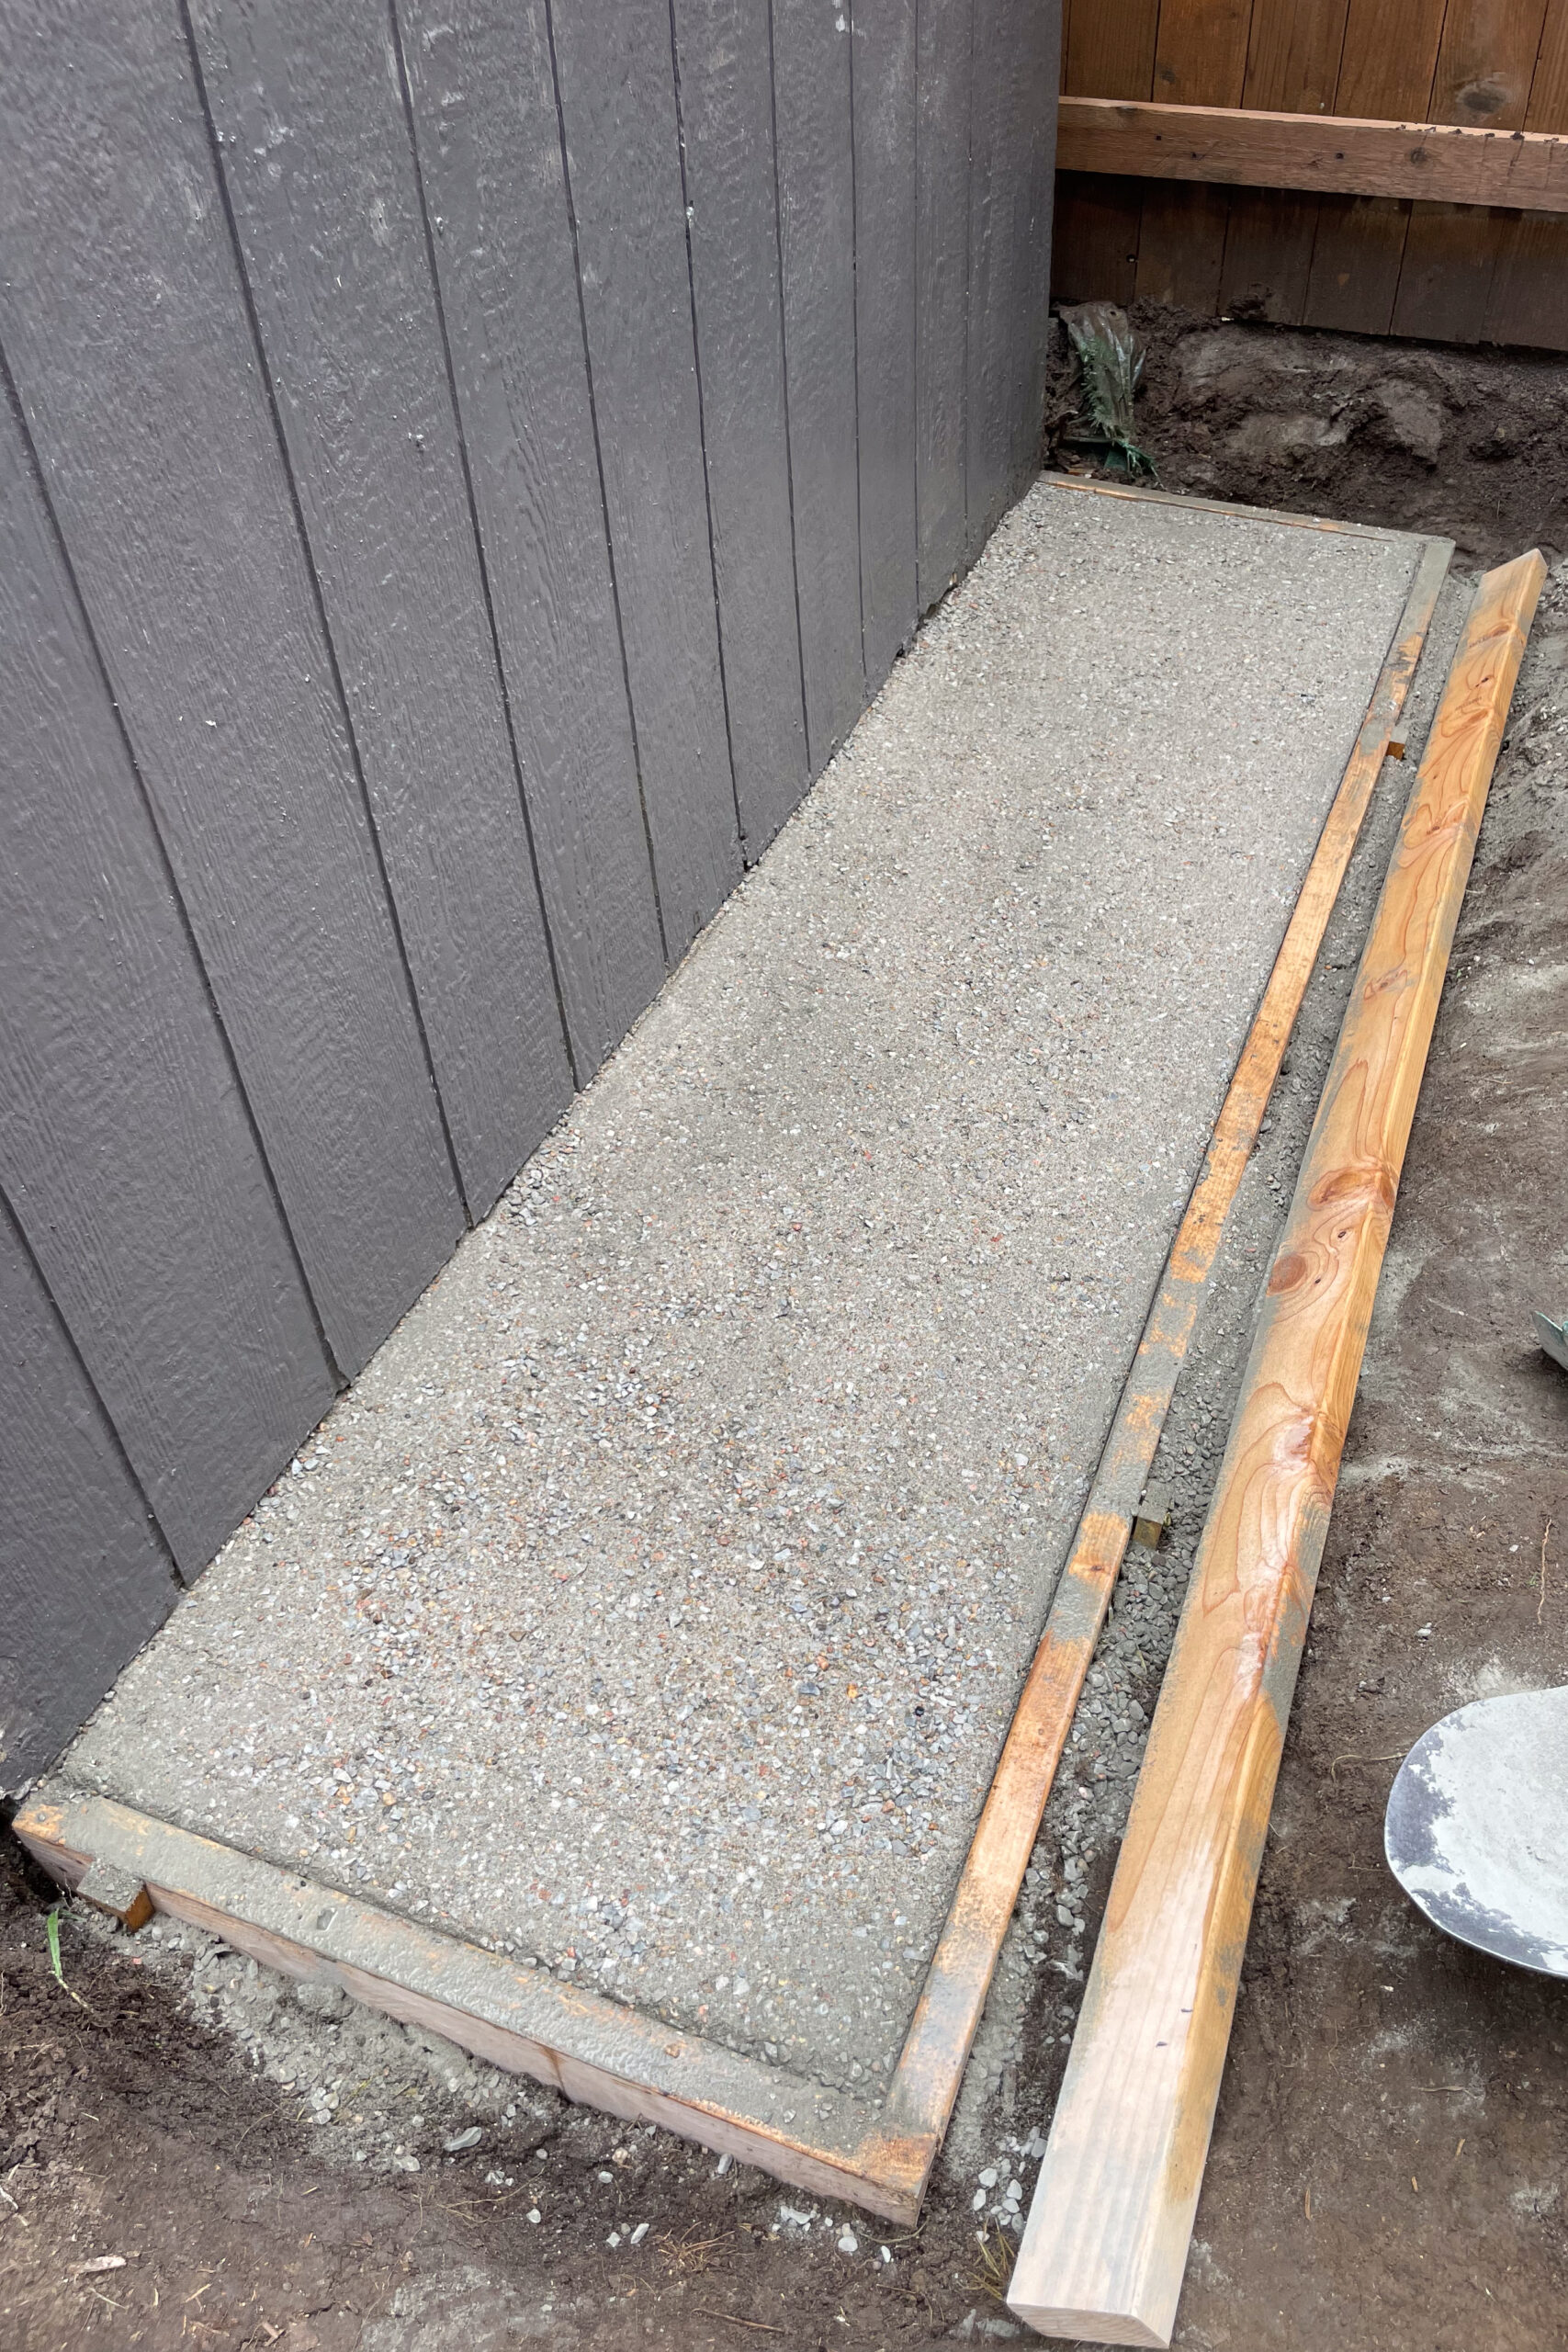 Installing a small dry pour concrete pad behind my shed. 